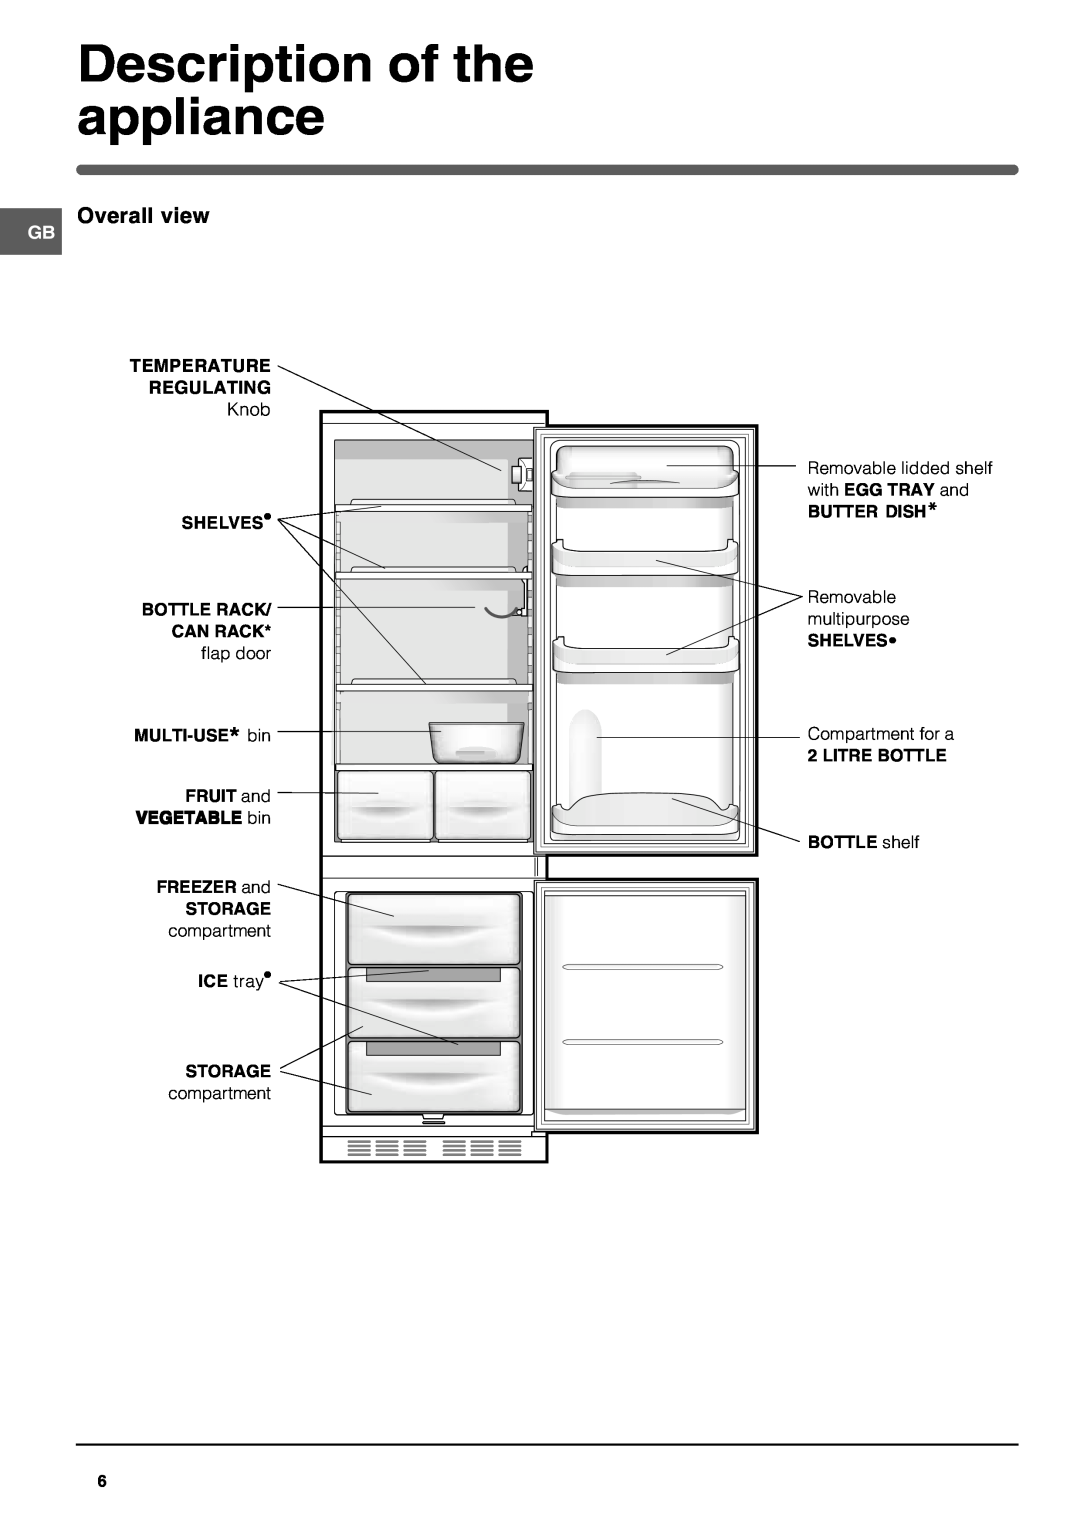 Hotpoint HM312NI manual Description of the appliance, Overall view, Temperature Regulating, Bottle Rack, MULTI-USE* bin 